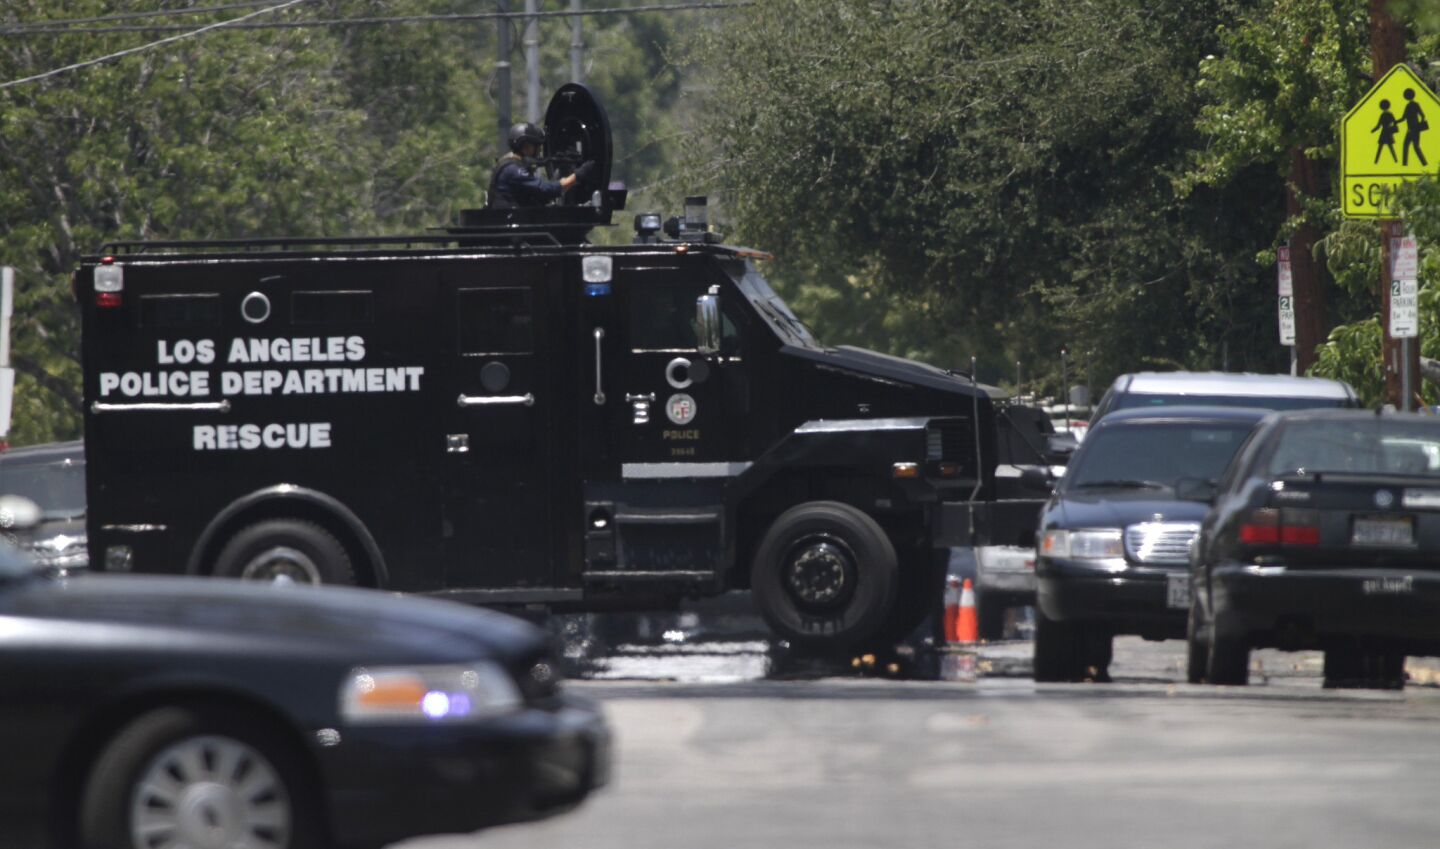 A man who led police on a high speed chase across L.A. freeways fled on foot into a North Hollywood neighborhood with a rifle. Police have locked down the area off Magnolia Boulevard near the 170 freeway.